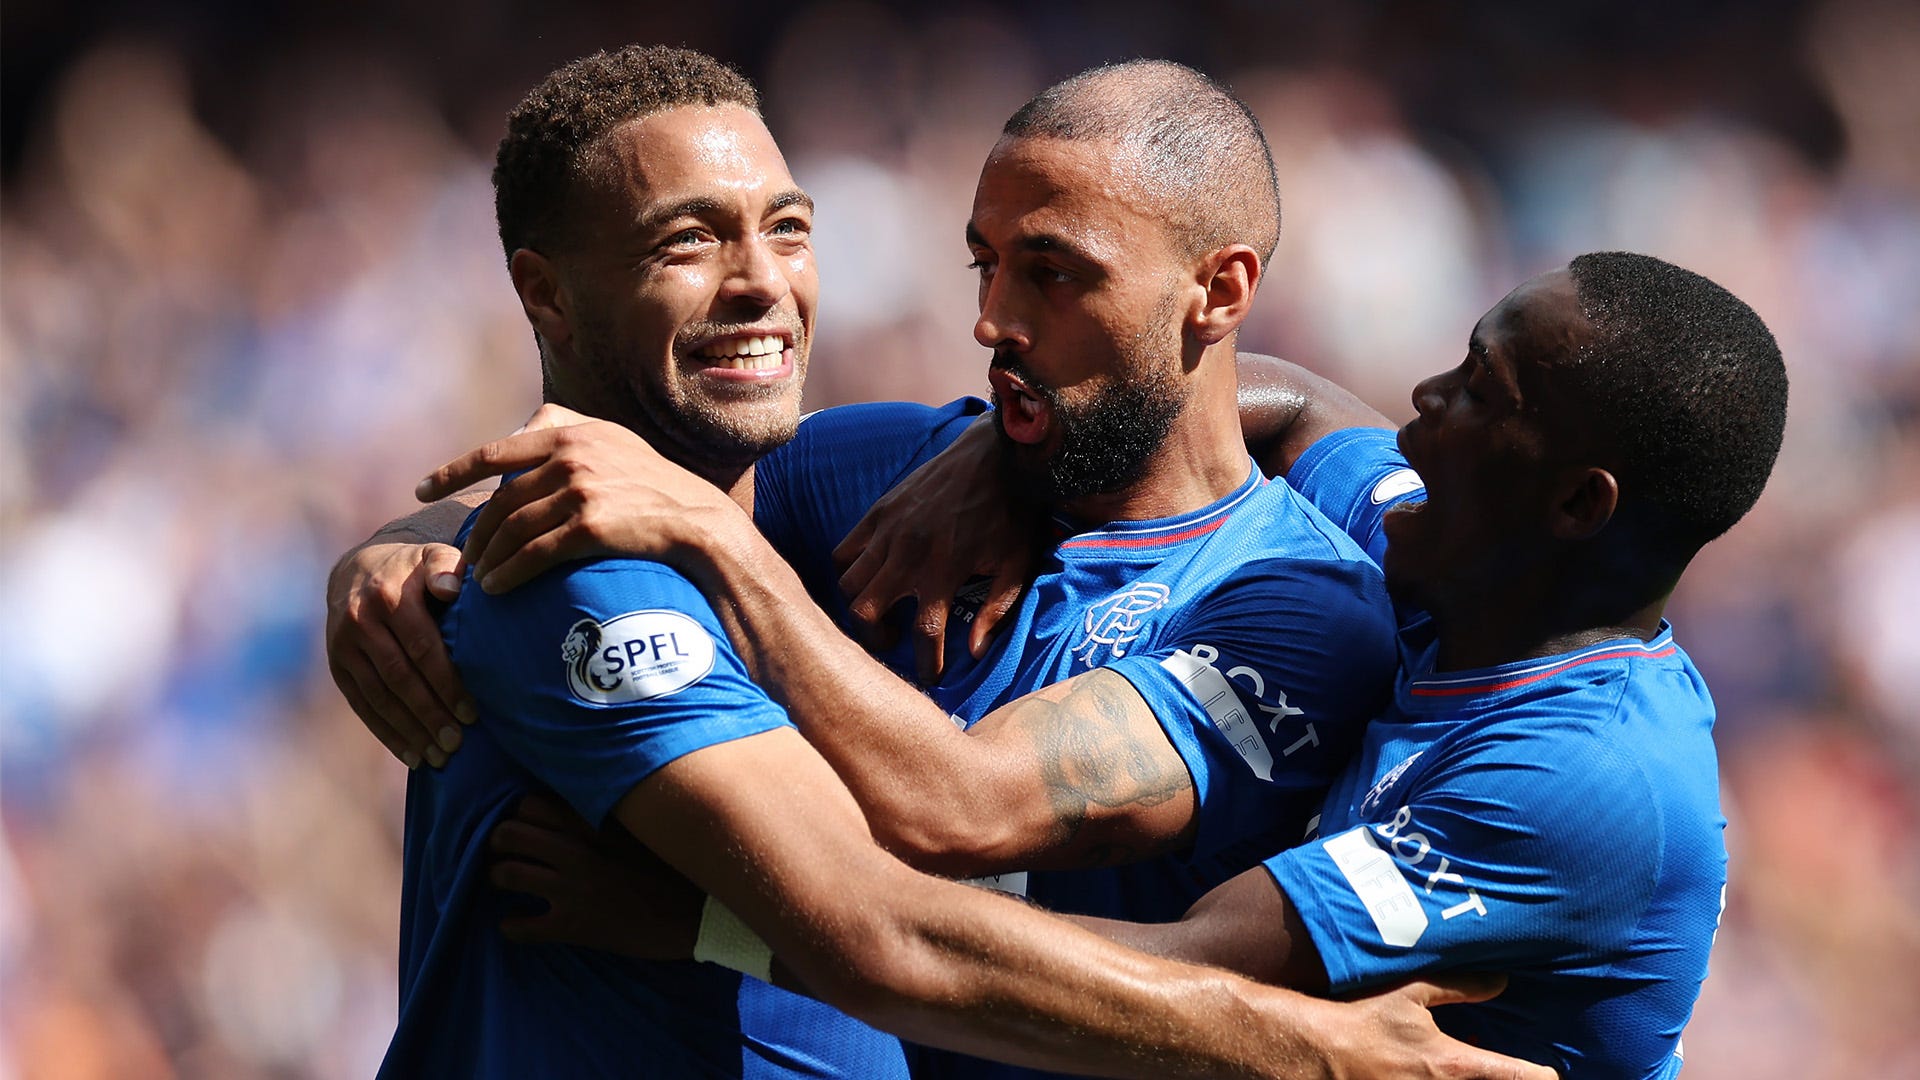 Rangers vs Motherwell Where to watch the match online, live stream, TV channels, and kick-off time Goal UK